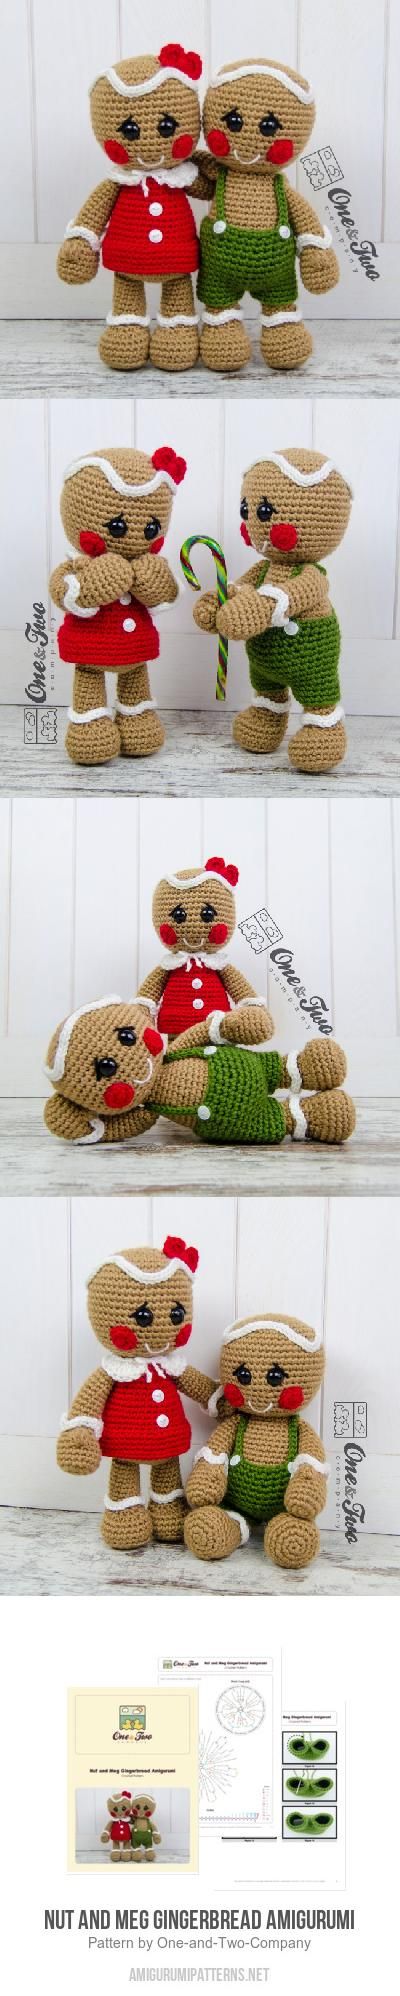 Nut And Meg The Gingerbreads Amigurumi Pattern